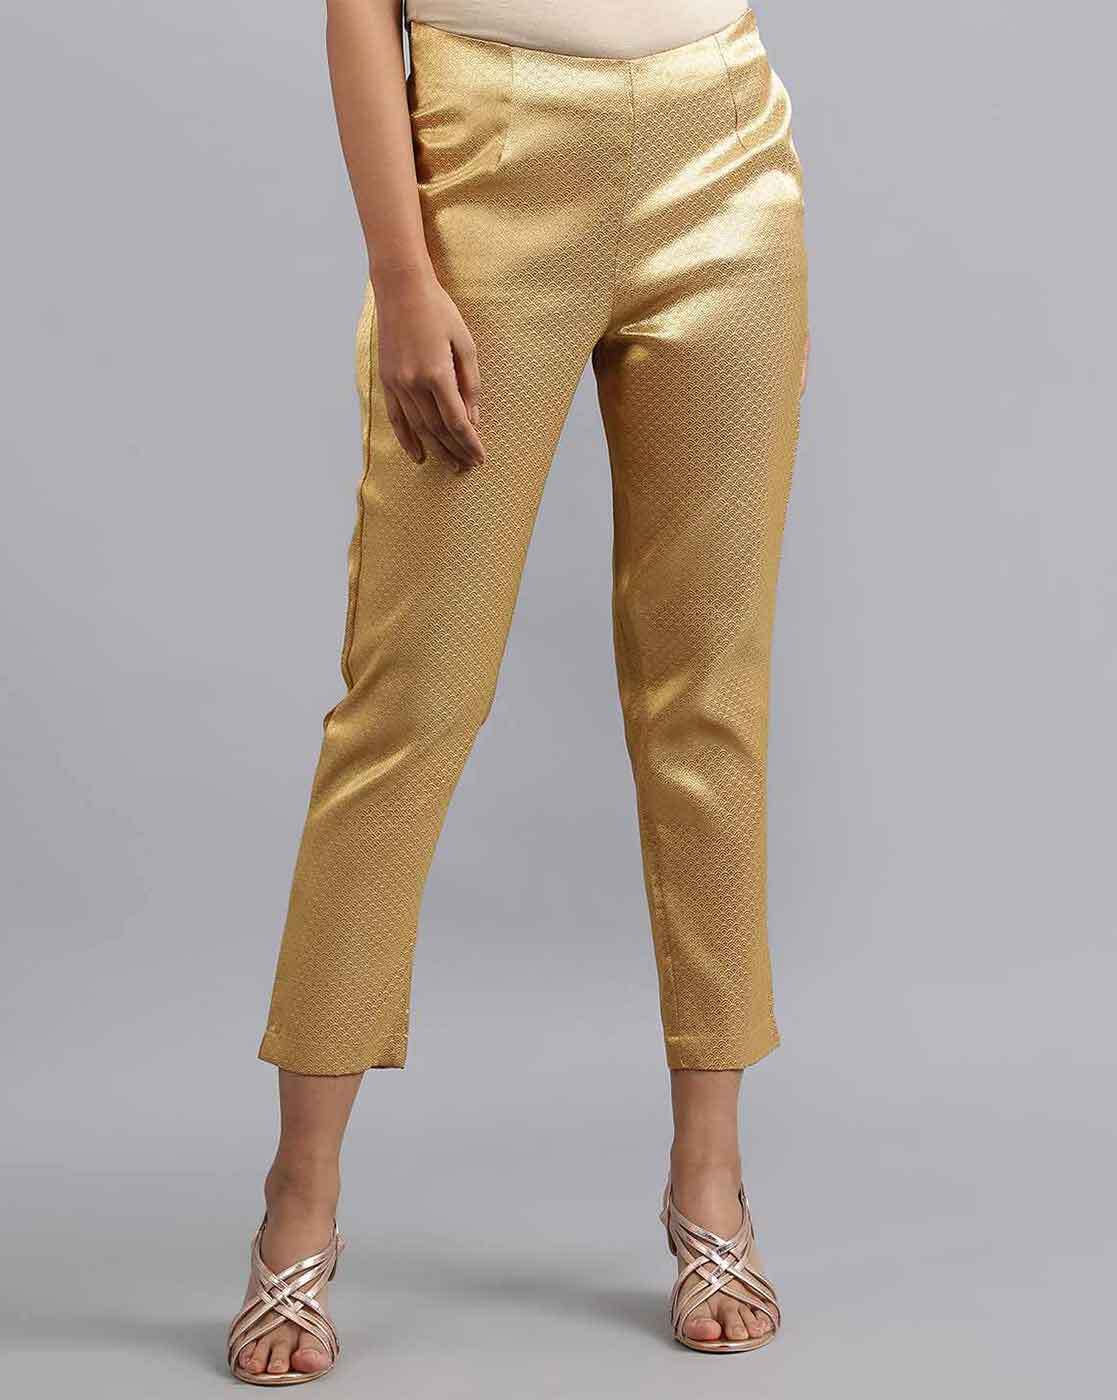 Haryzone Regular Fit Women Black White Red Trousers  Buy Haryzone  Regular Fit Women Black White Red Trousers Online at Best Prices in India   Flipkartcom